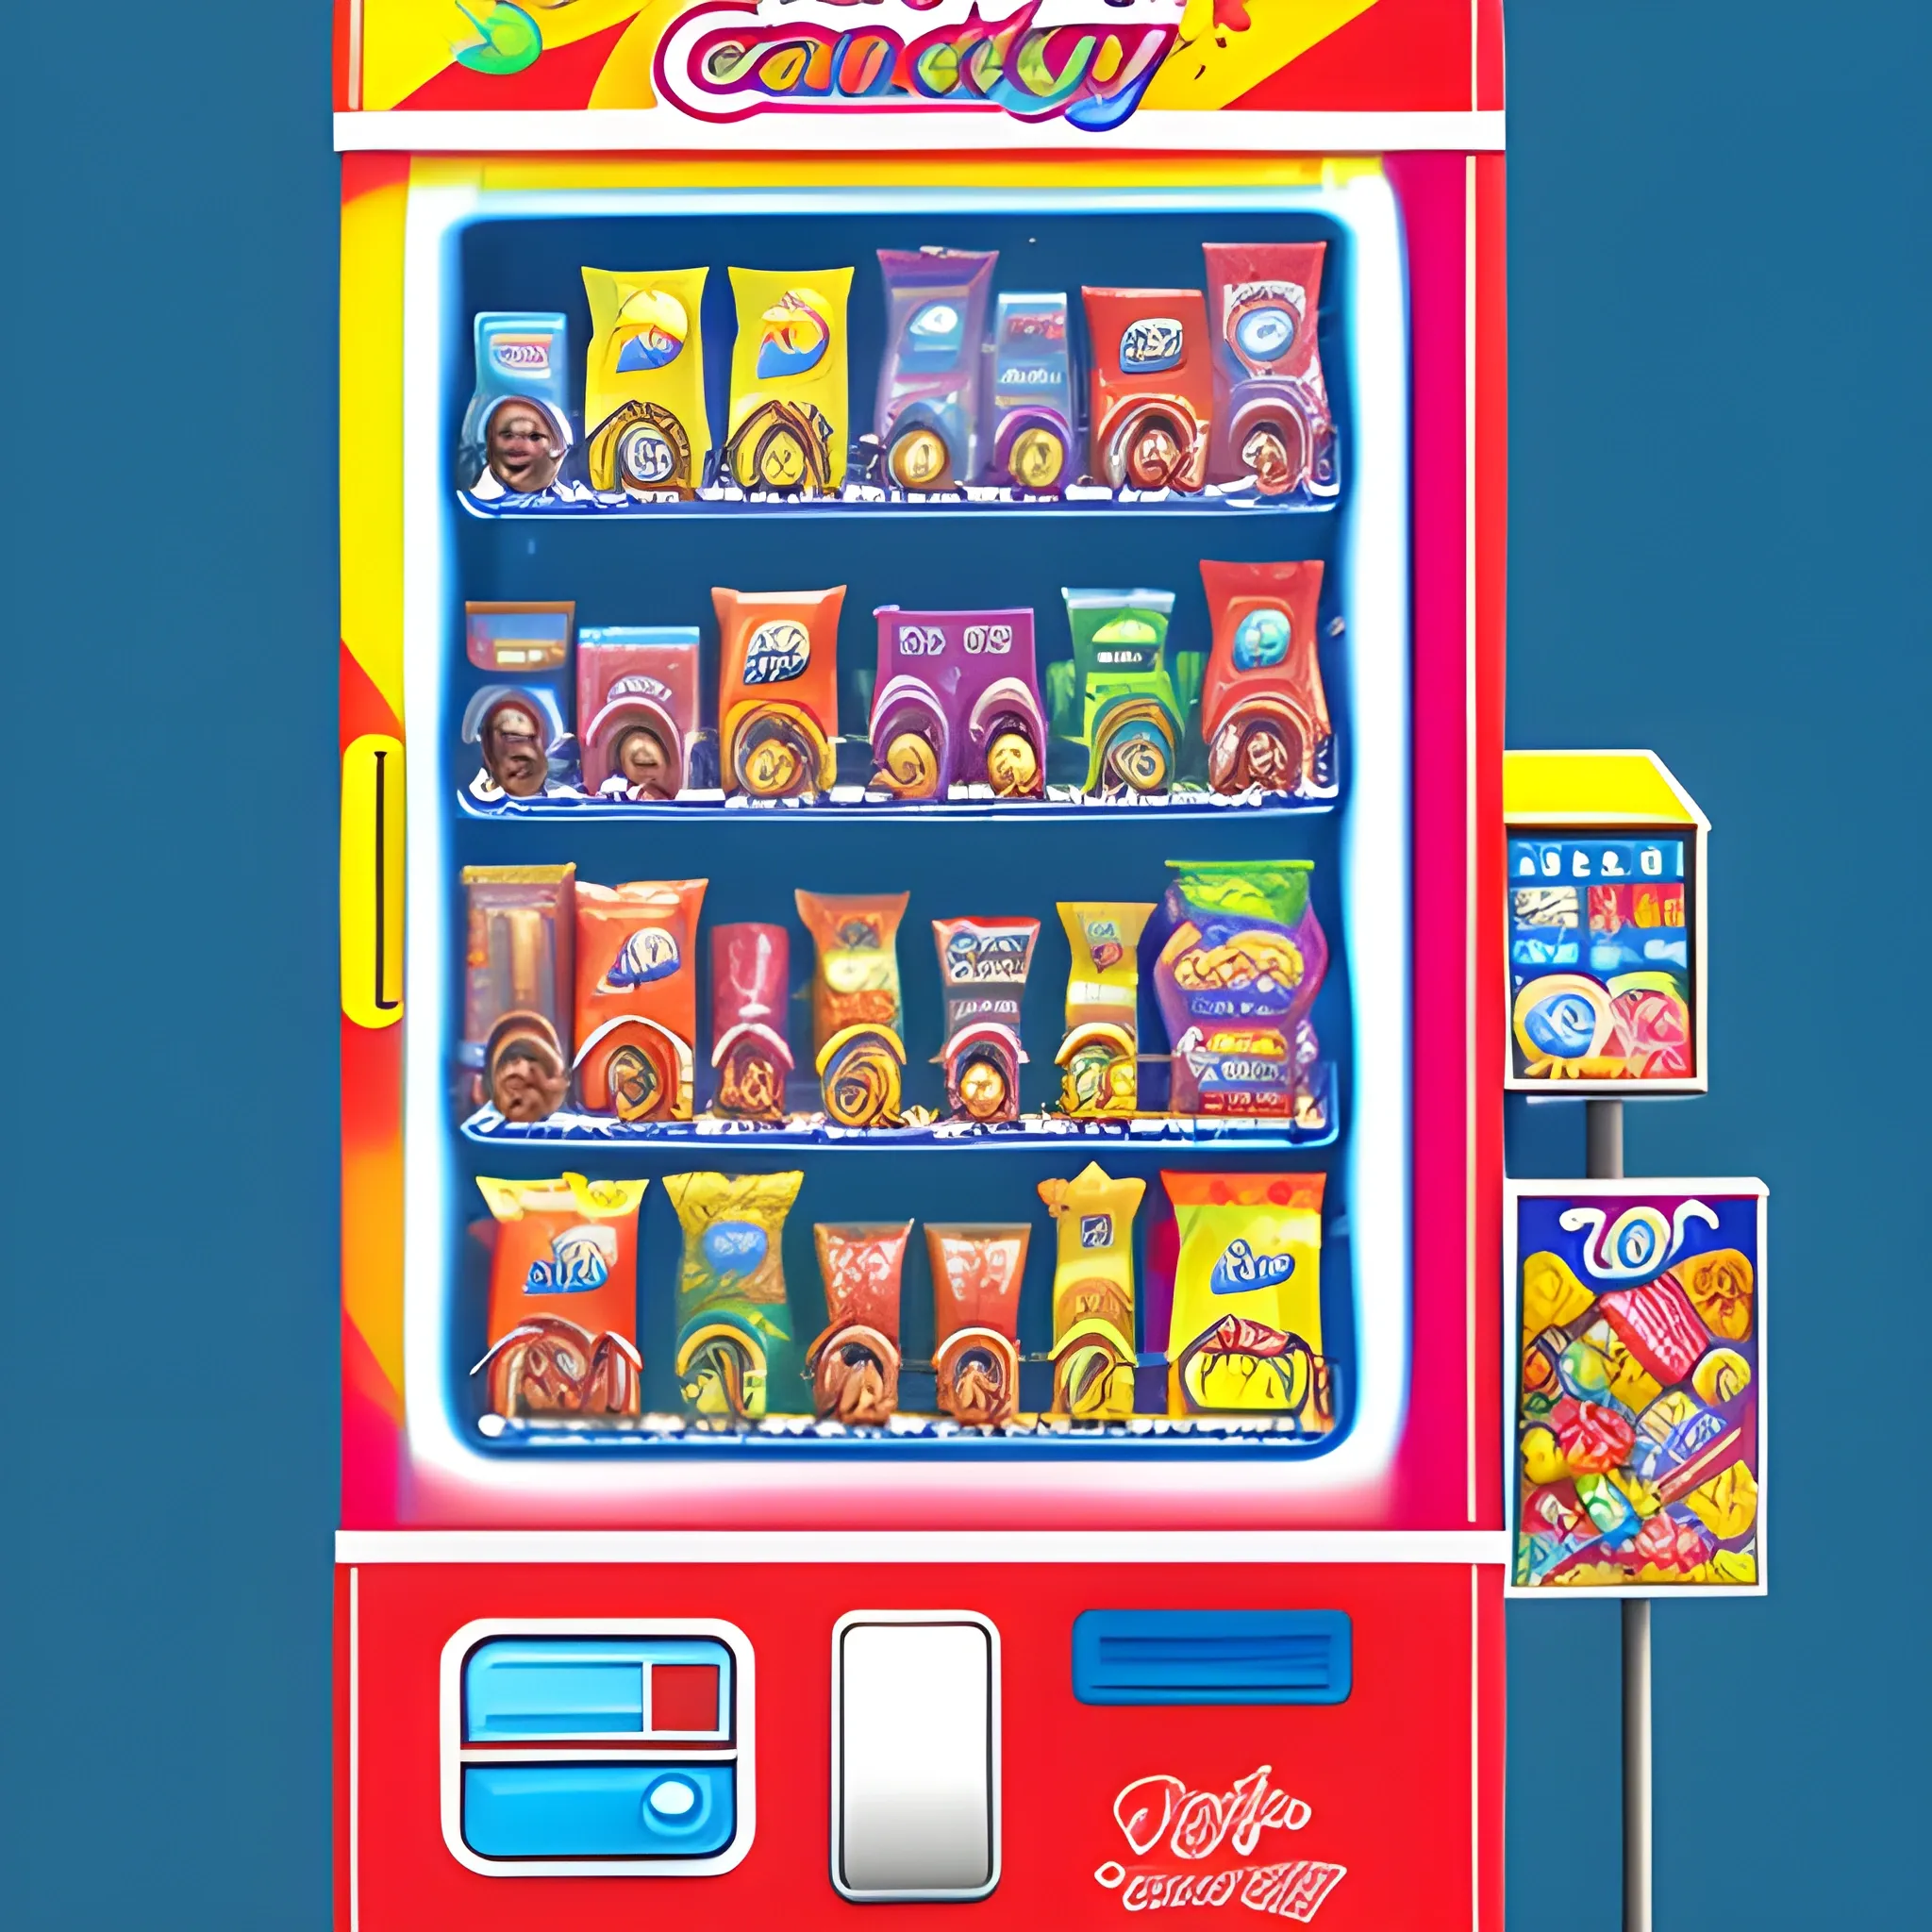 candy, beverage, toy vending machine in digital drawing style, with a close-up view